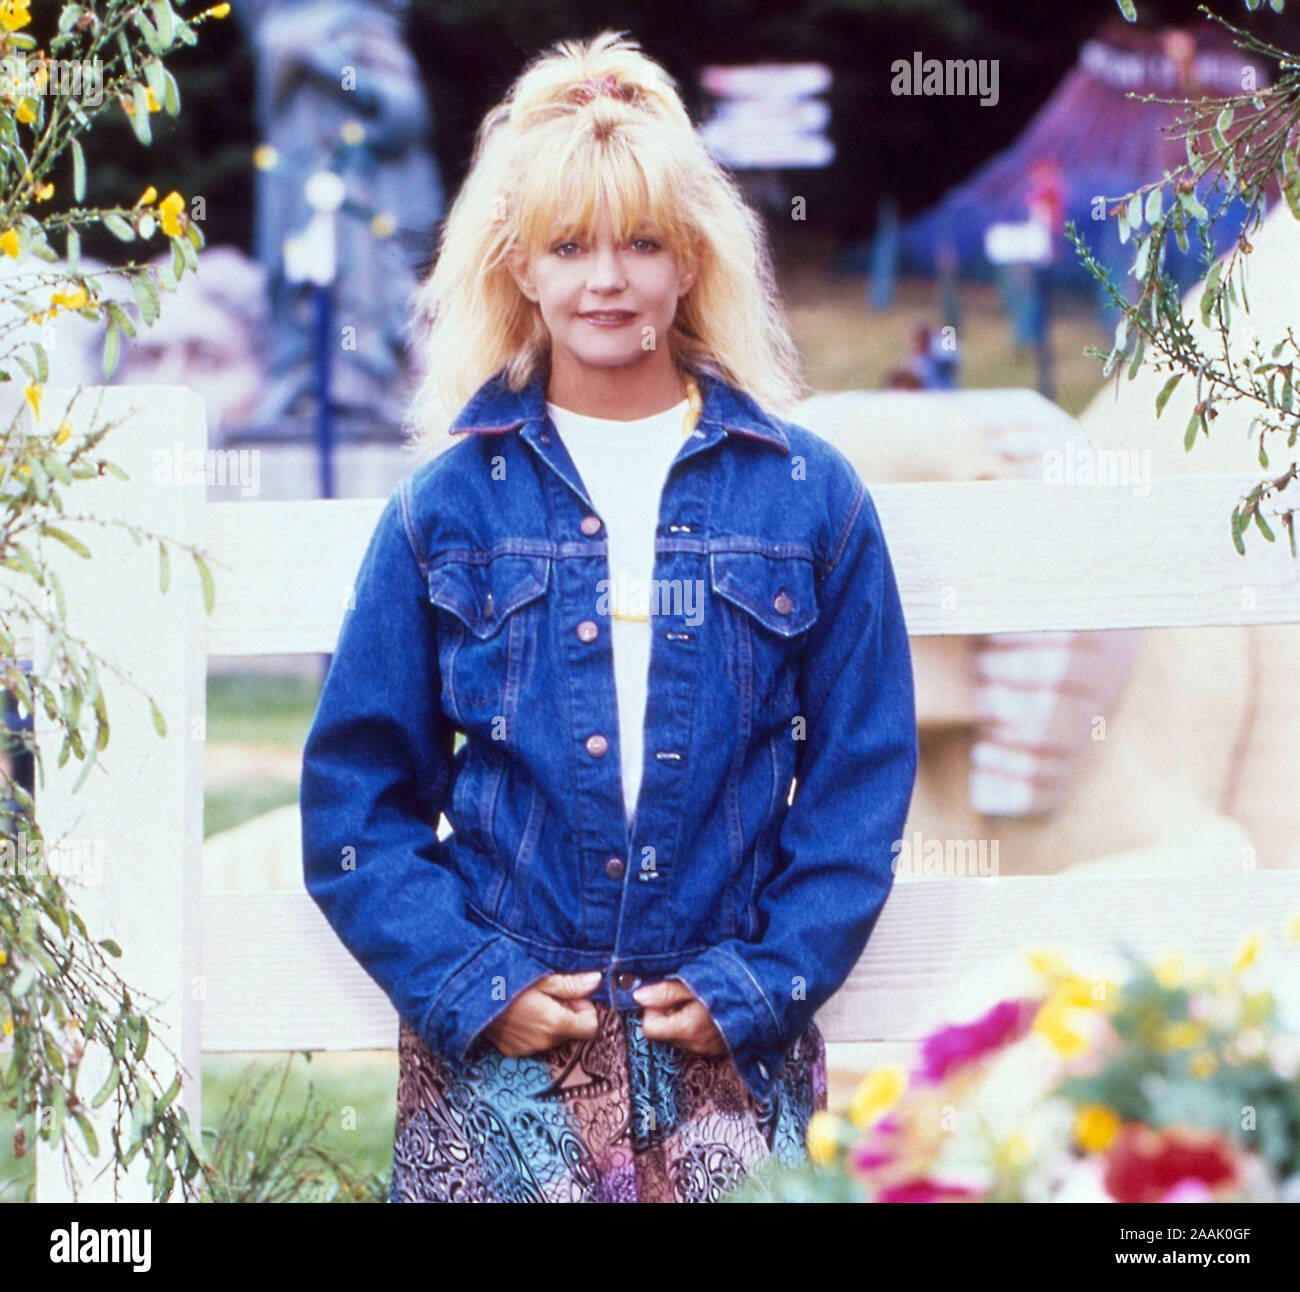 GOLDIE HAWN in OVERBOARD (1987), directed by GARRY MARSHALL. Credit: M.G.M. / Album Stock Photo